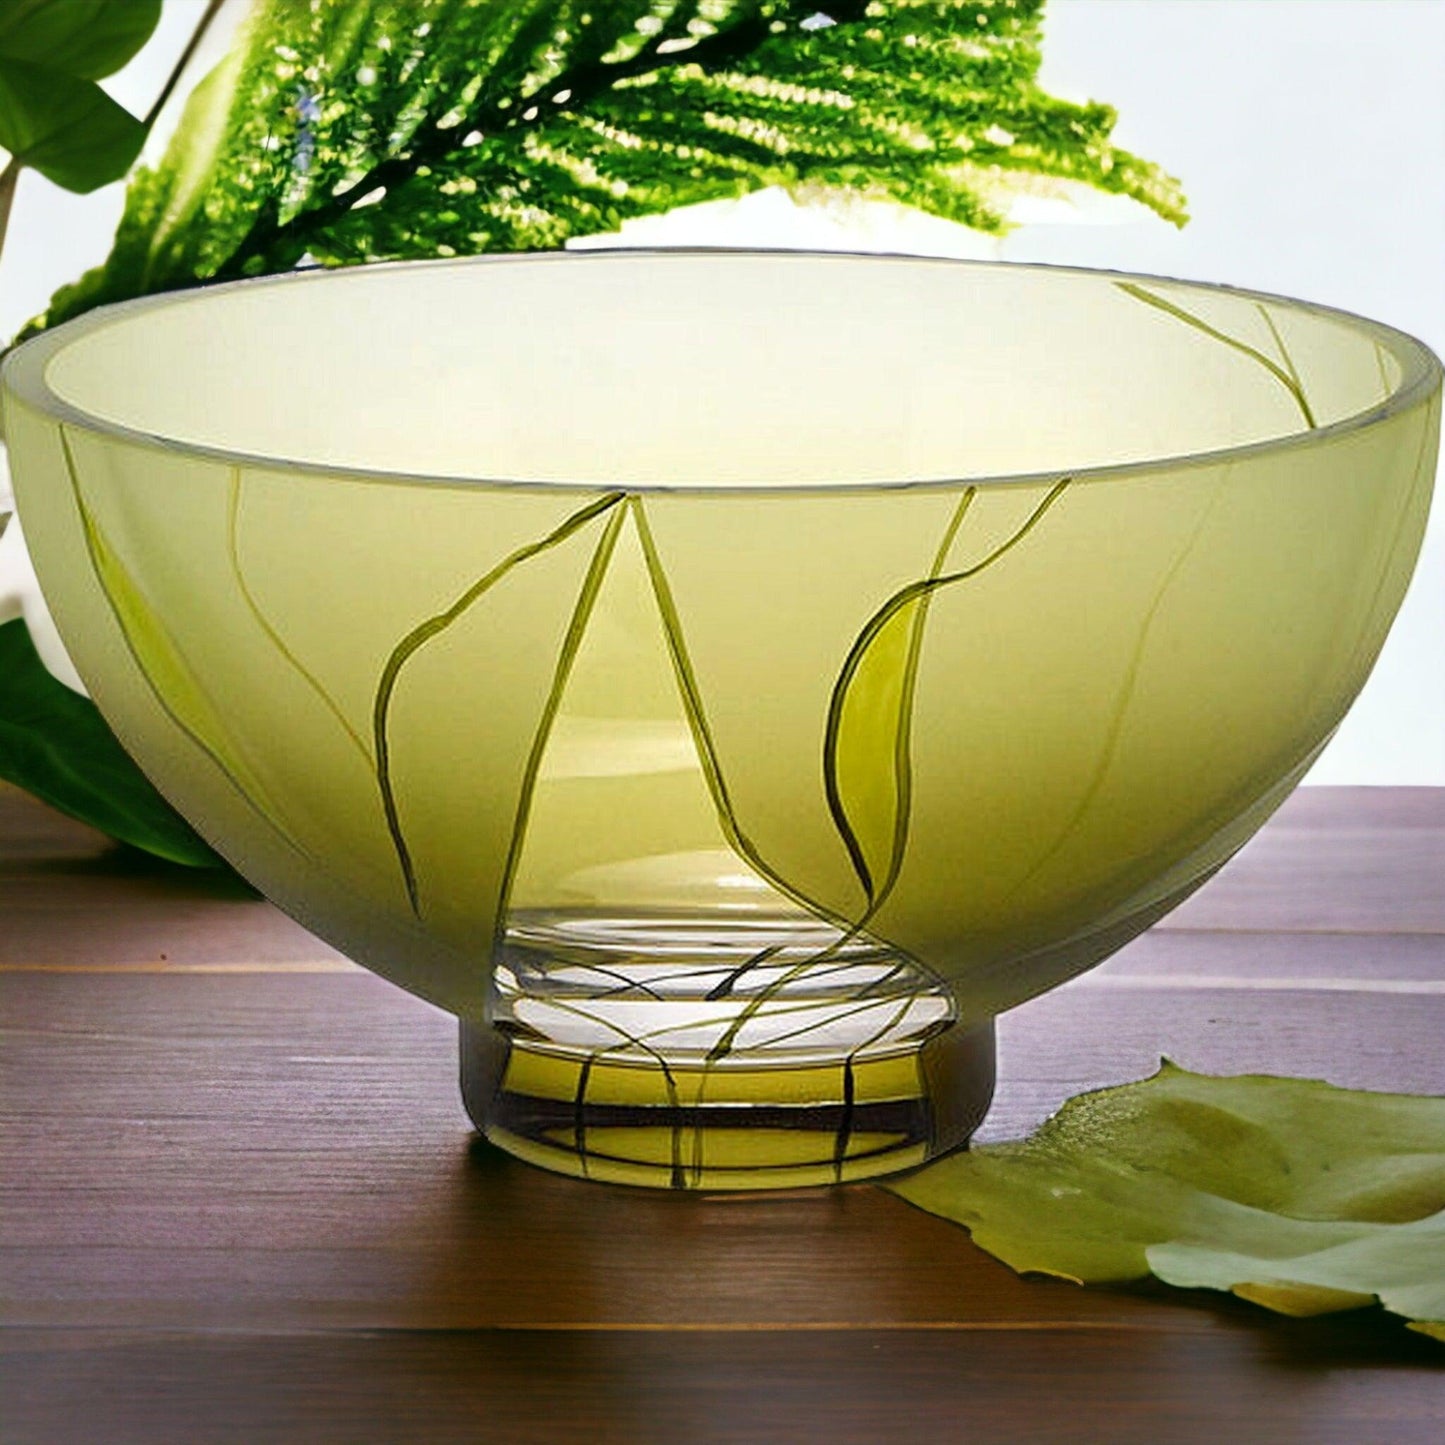 Evergreen Crystal Glass 7-inch Decorative Fruit Bowl - Nature Home Decor